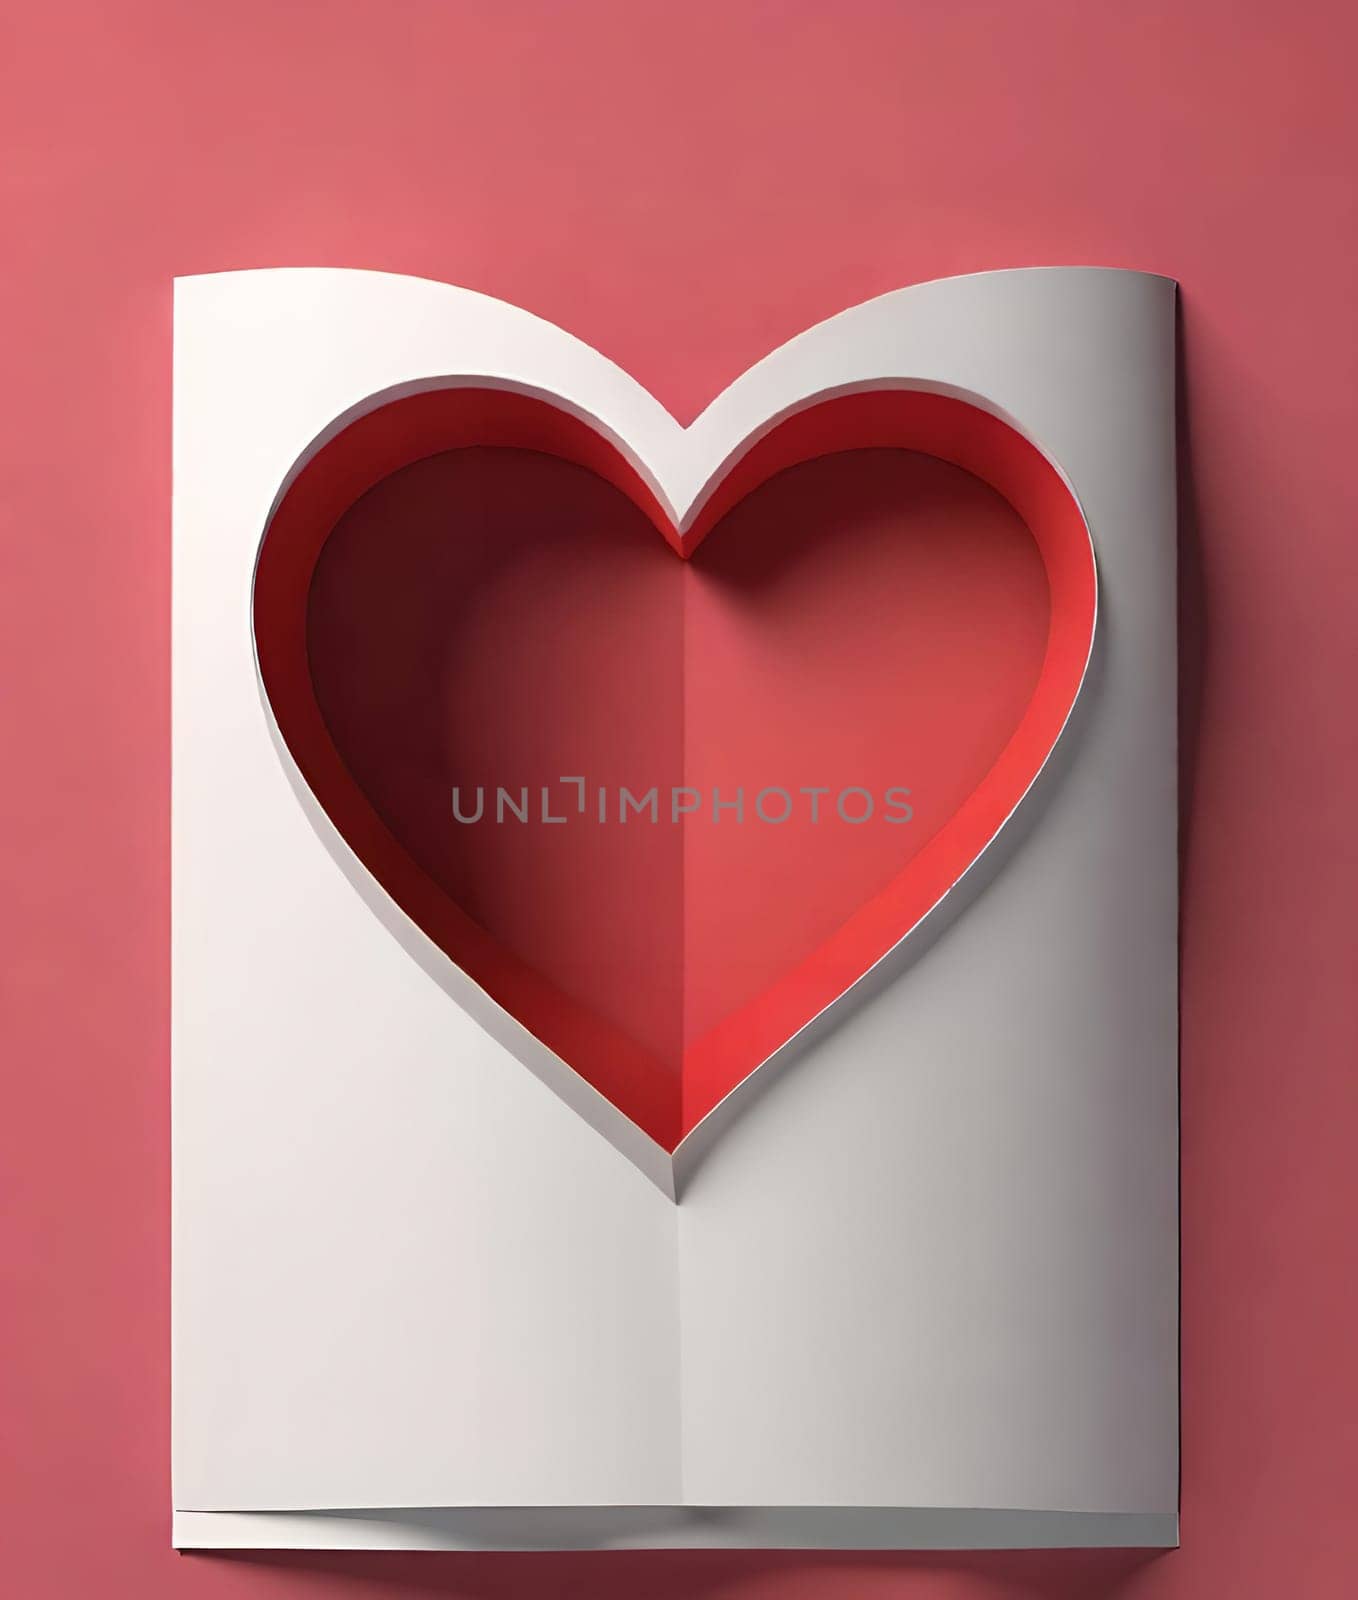 Valentine's day greeting card with hearts and place for your text.Valentine's day card with heart on background. Vector illustration.Valentine's day card with red heart. 3d rendering.Valentine's day greeting card with red heart on abstract background.Illustration of a valentine card with a red heart on it.